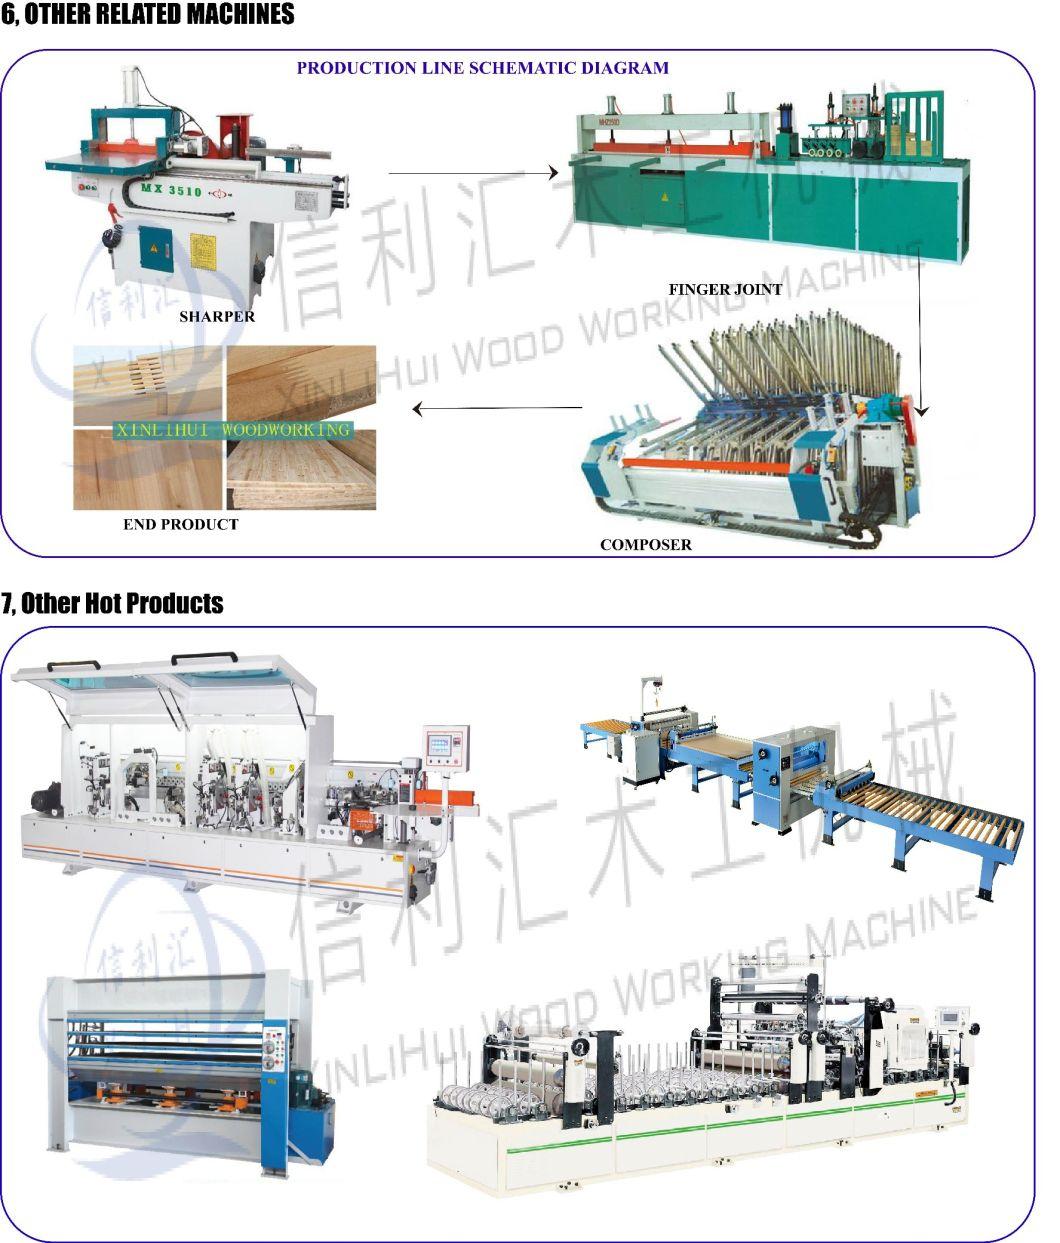 Automatic Woodworking Finger Joint Assembler/ Automatic Woodworking Finger Jointer Clamp Automatic Finger Tenon Assembly Machine with Loader